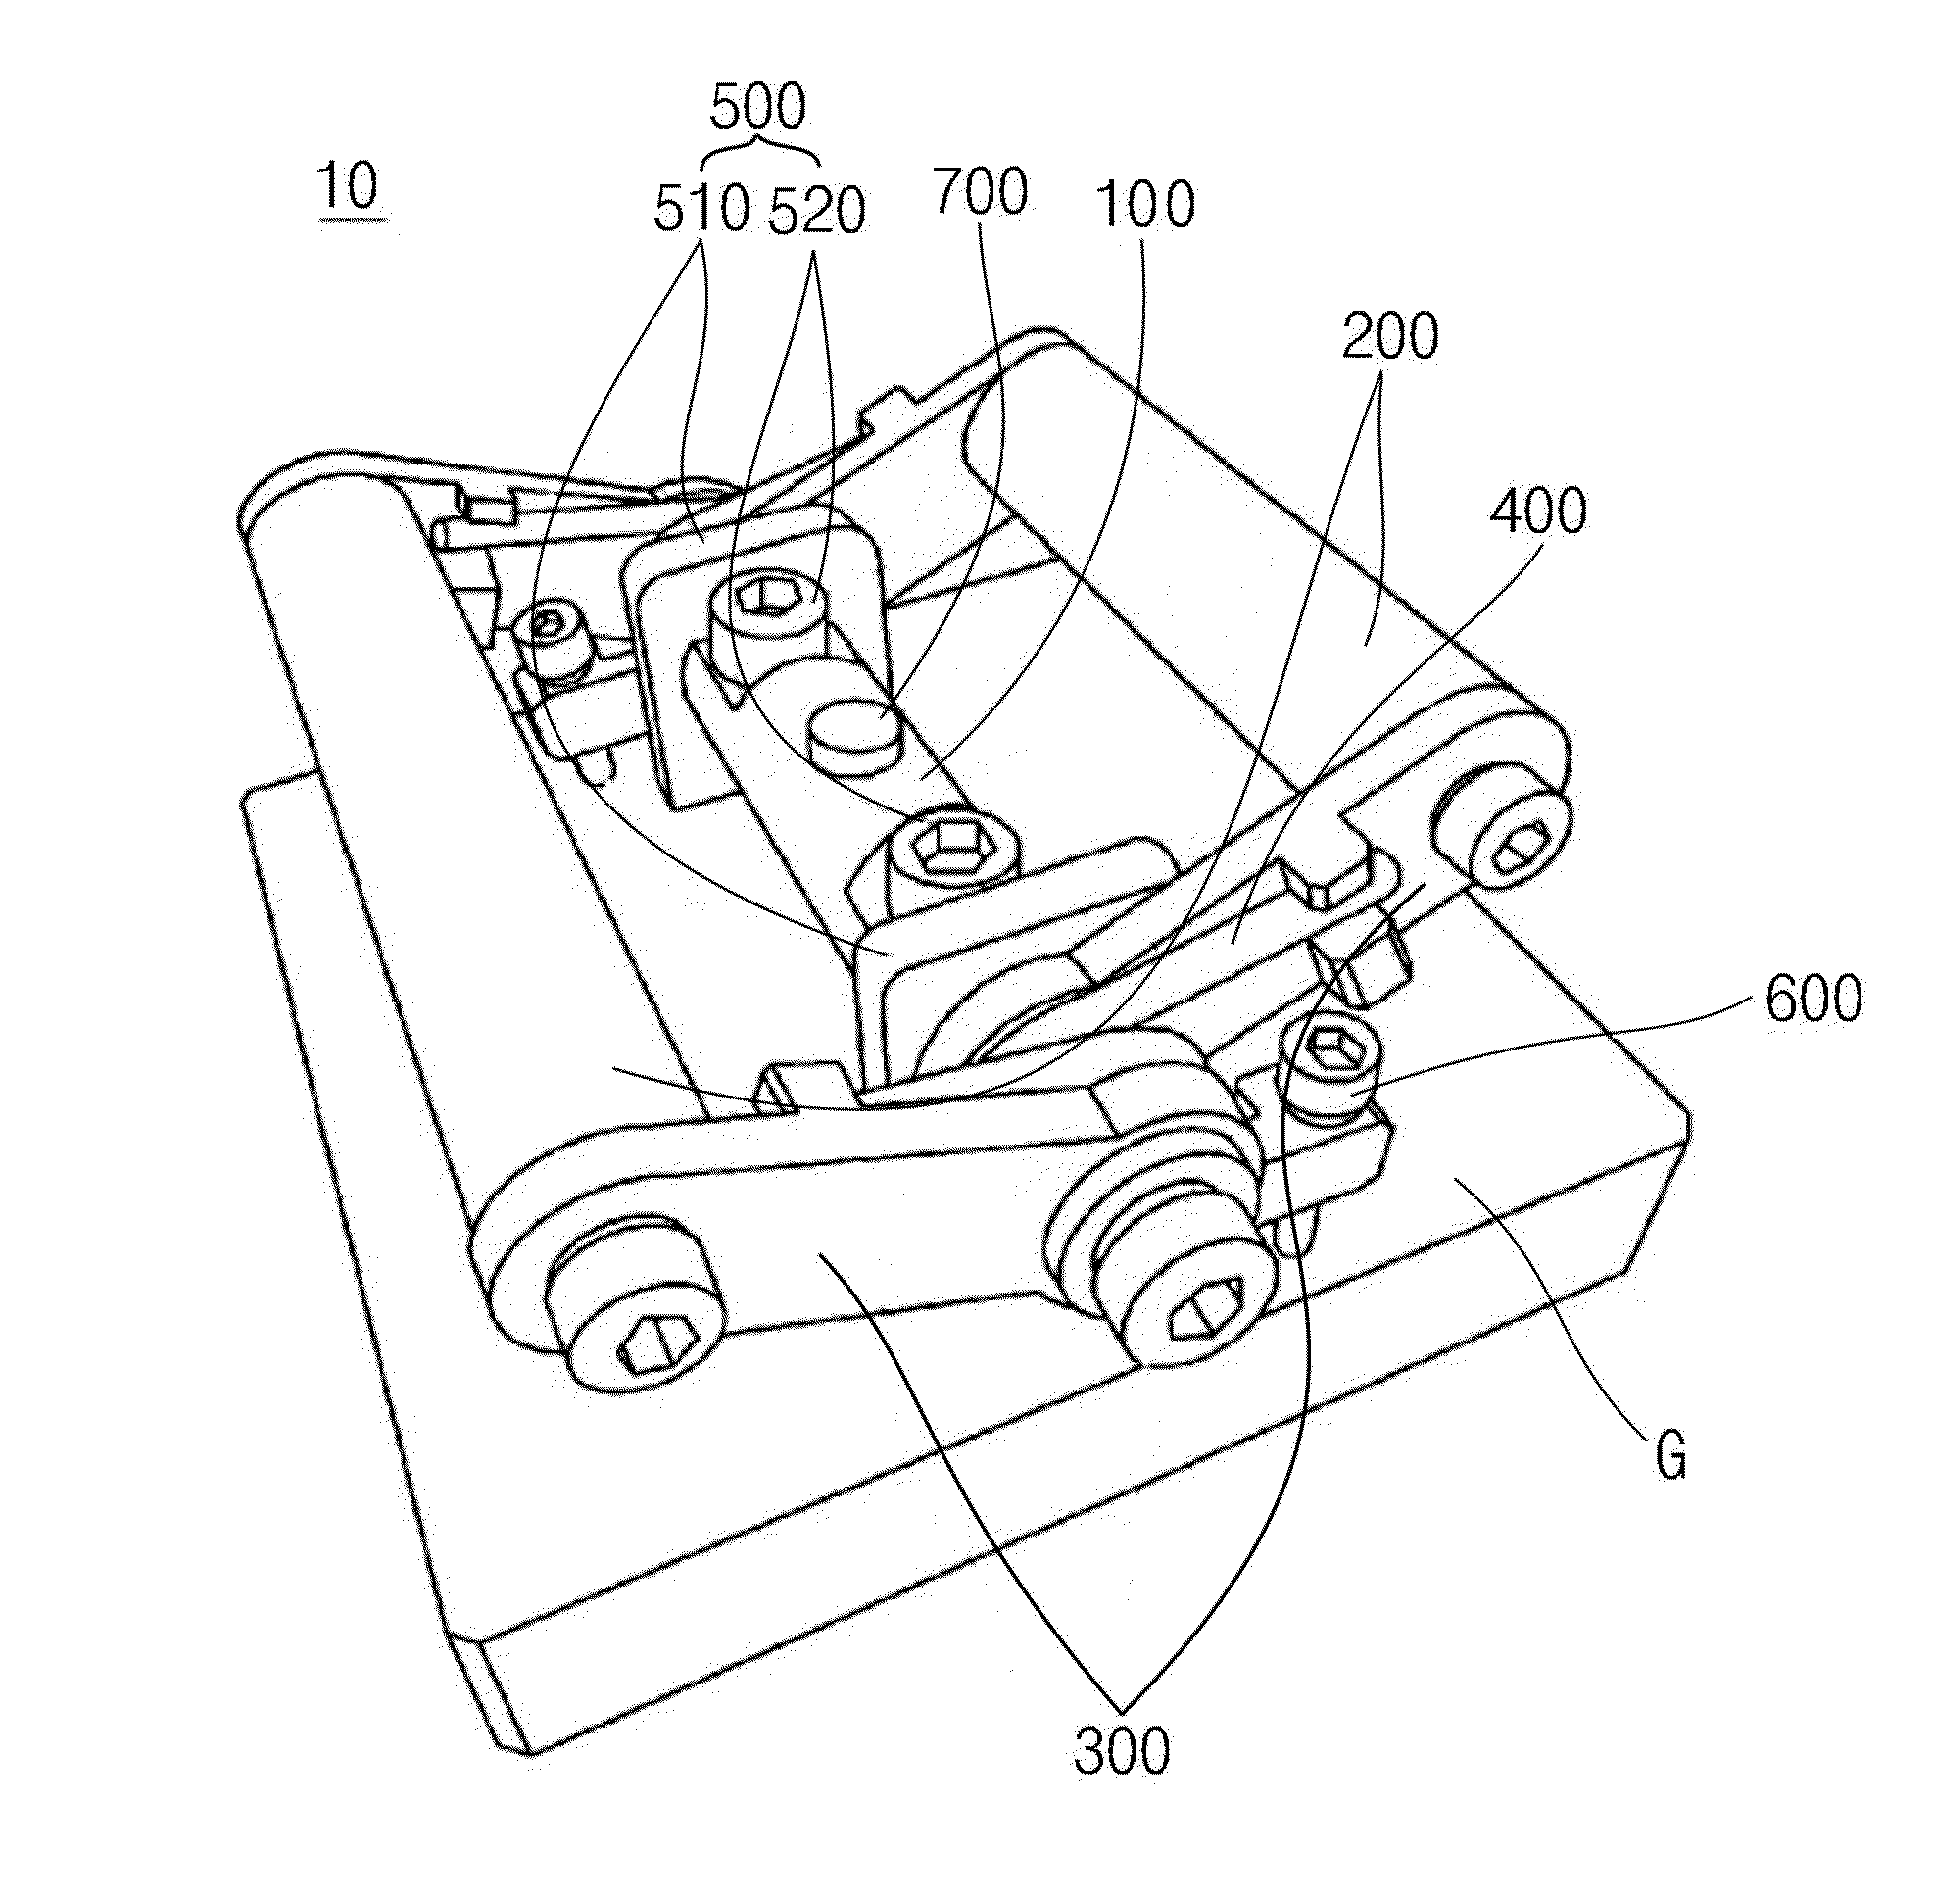 Guide frame support device